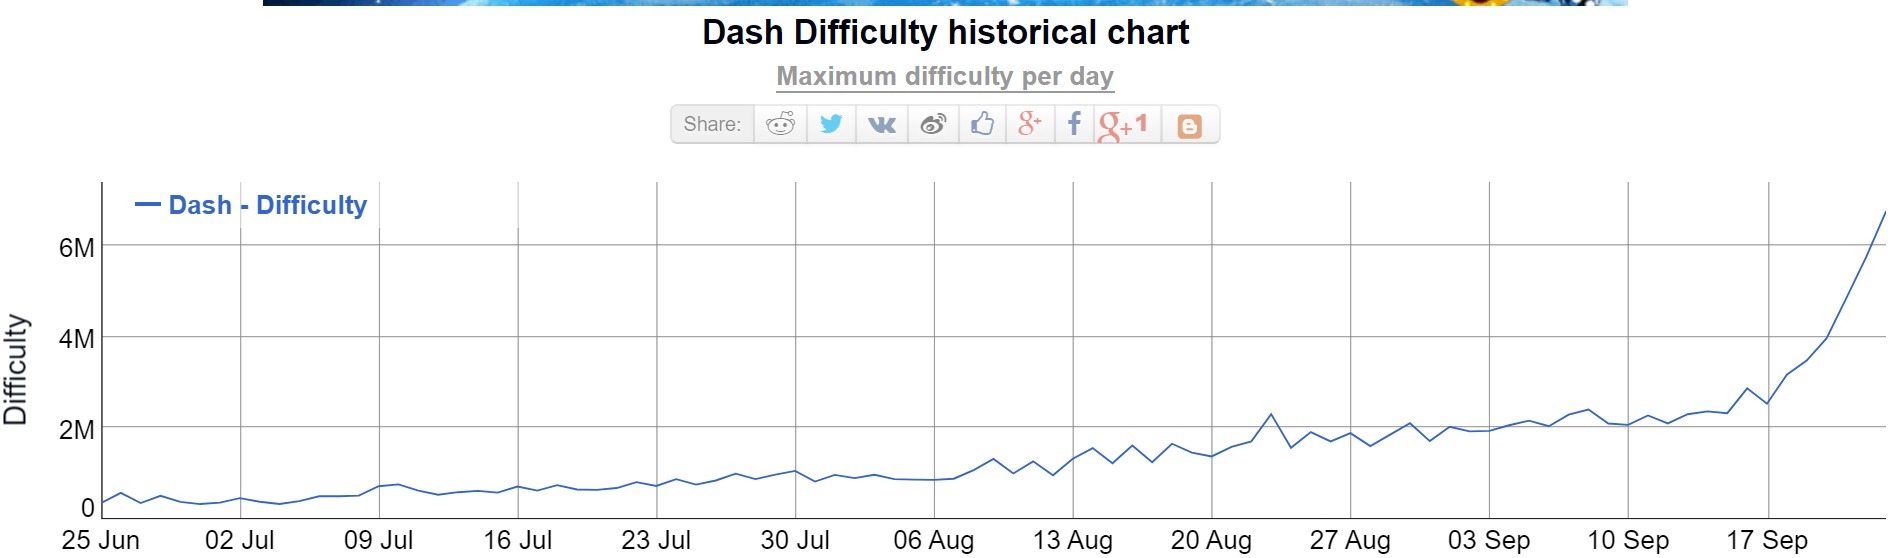 Dash Difficulty Chart